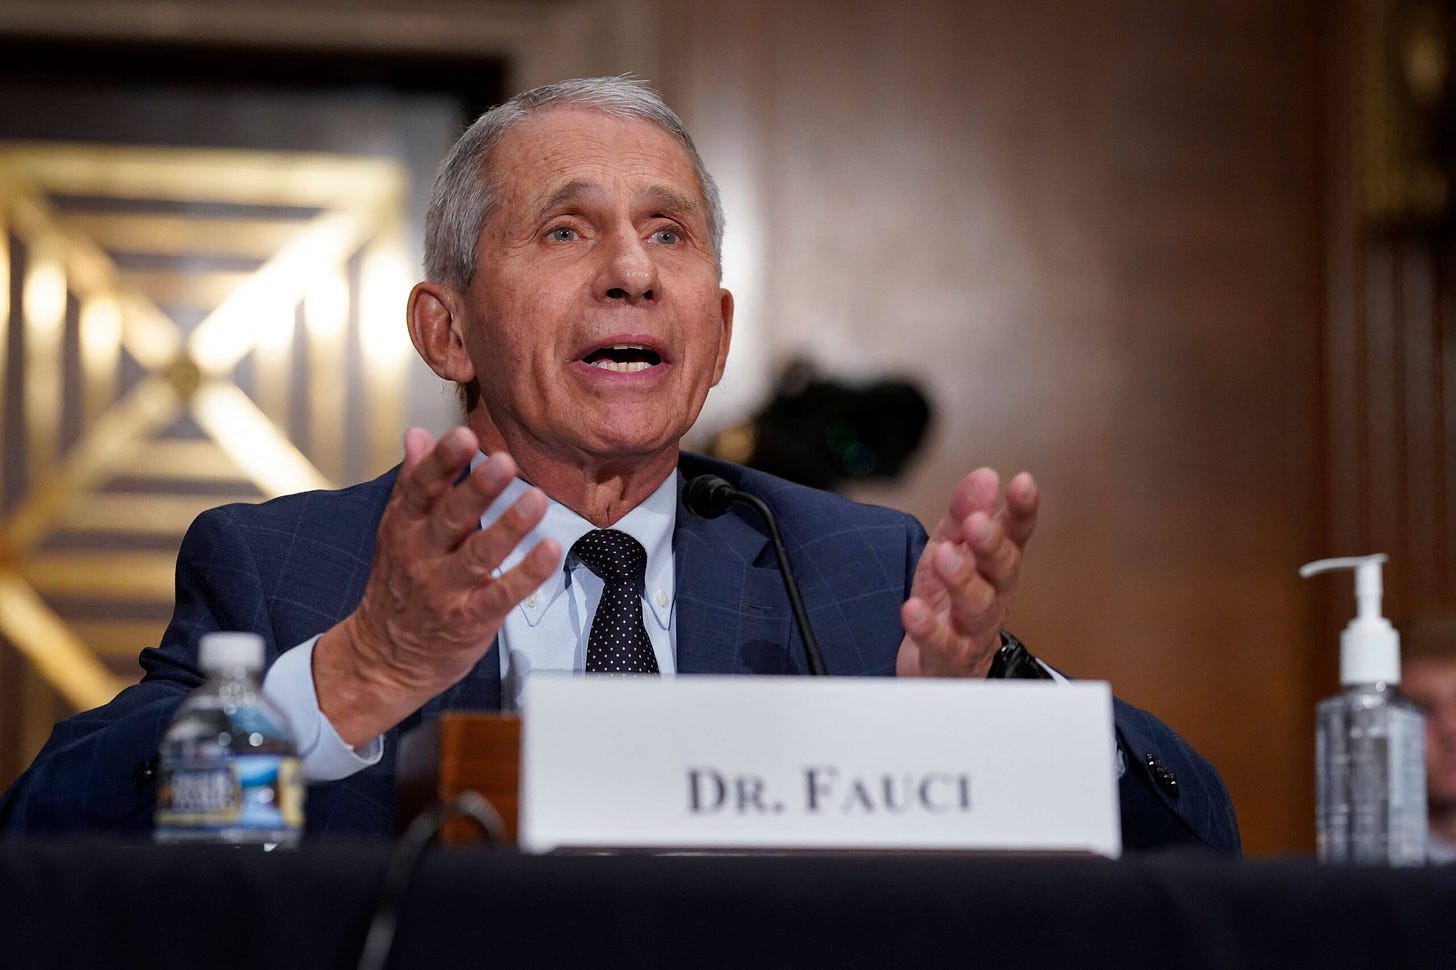 Fauci: 'We're going in the wrong direction' - KION546